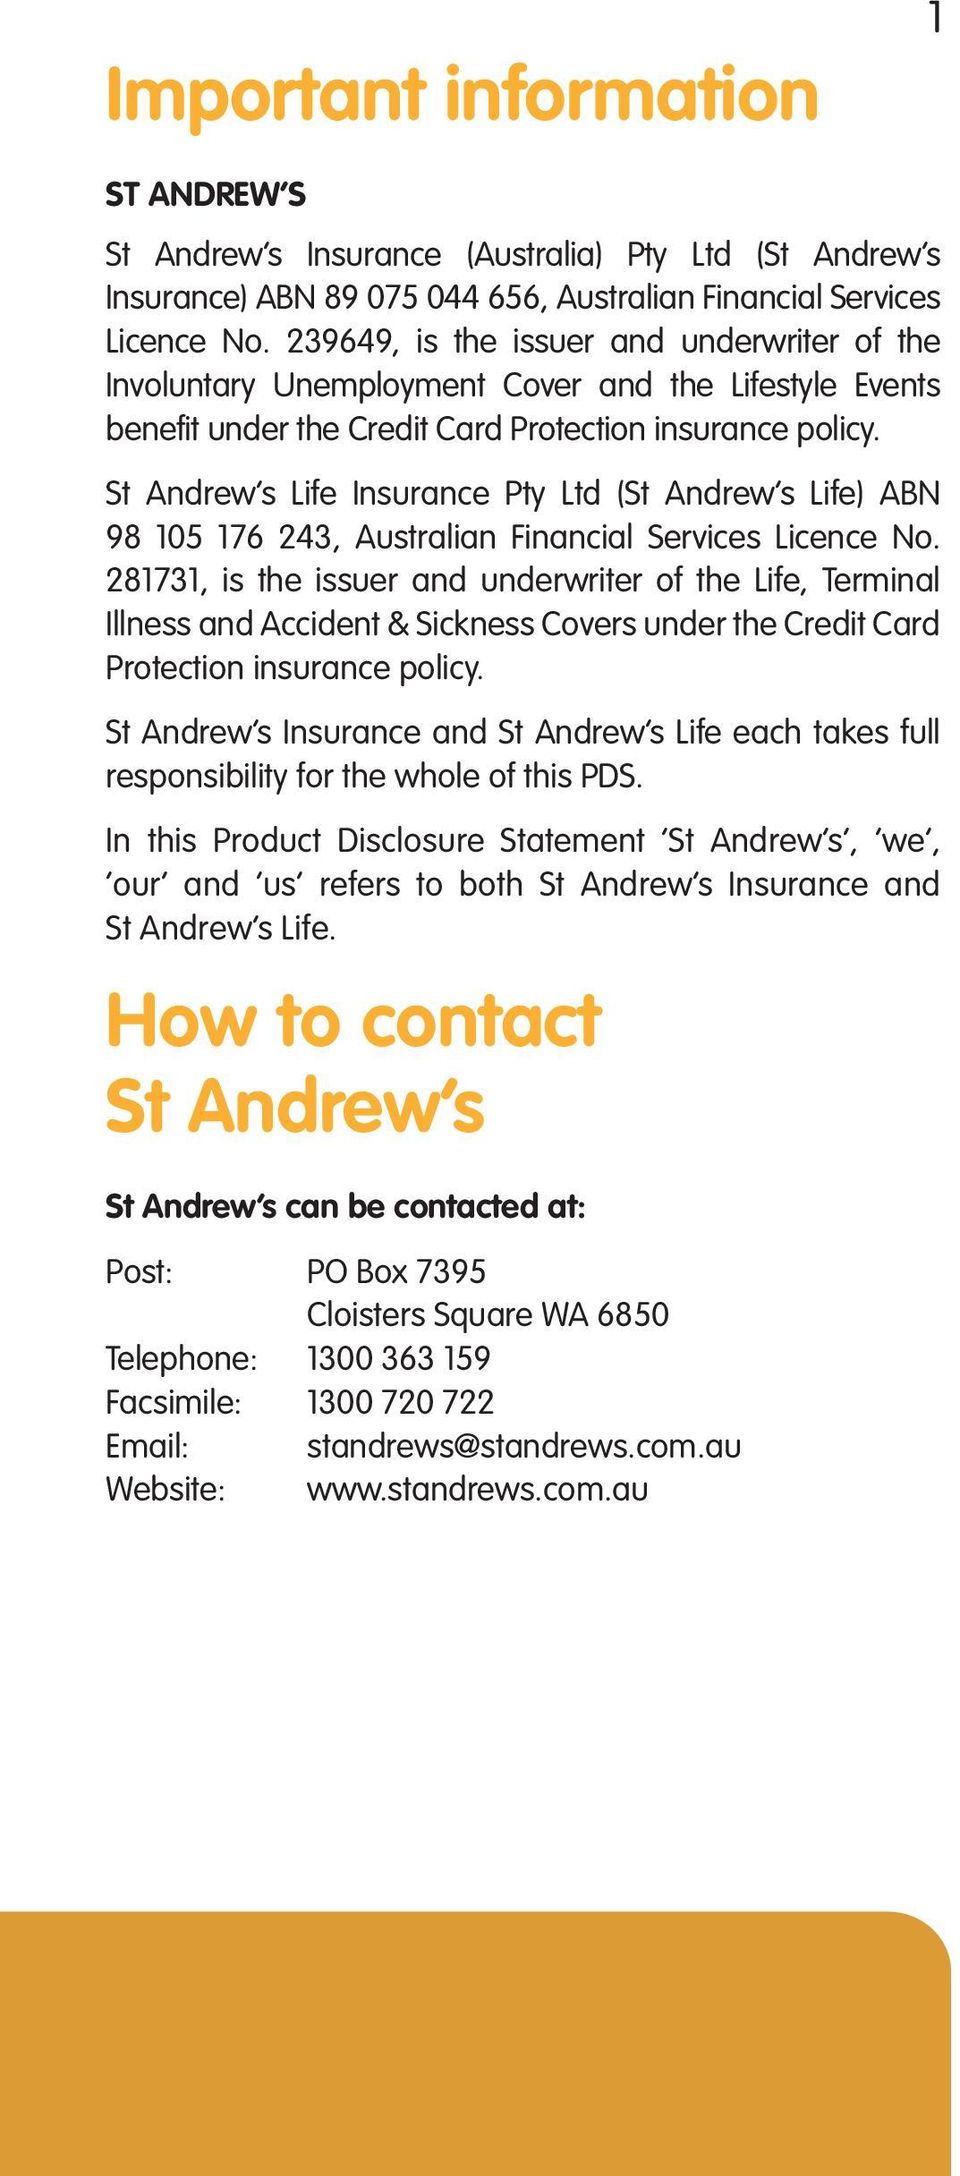 St Andrew s Life Insurance Pty Ltd (St Andrew s Life) ABN 98 105 176 243, Australian Financial Services Licence No.